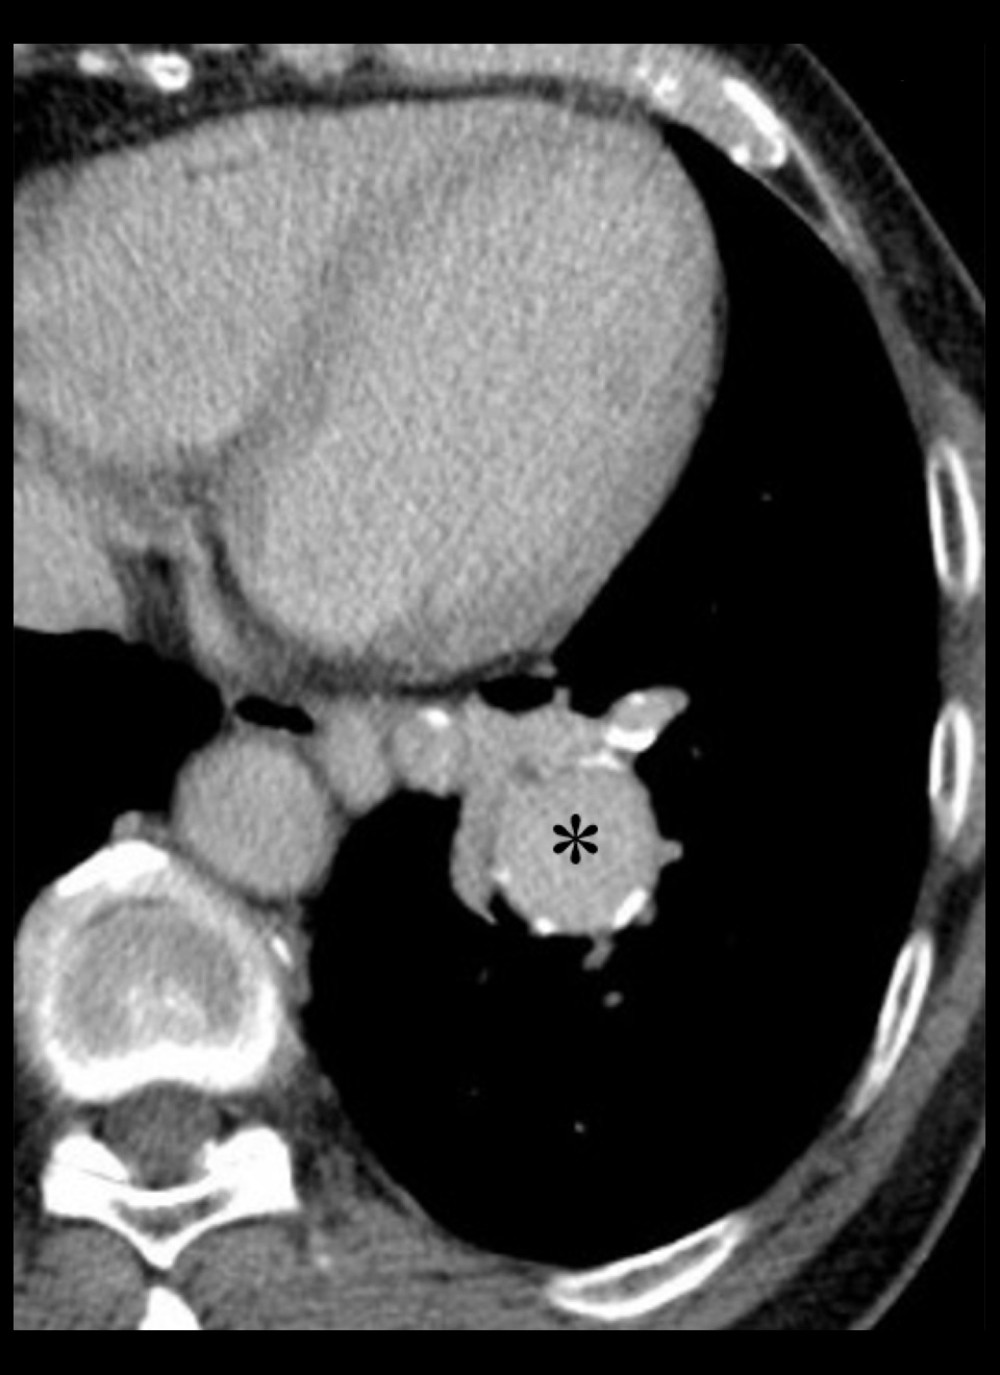 Axial CECT image in the portal venous phase showing an enhancing oval-shaped lesion (asterix) in the lower lobe of the left lung. Portions of its walls show mural calcification. Adjacent to it was a conglomerate of tortuous and dilated vessels deriving its arterial supply from the descending thoracic aorta.